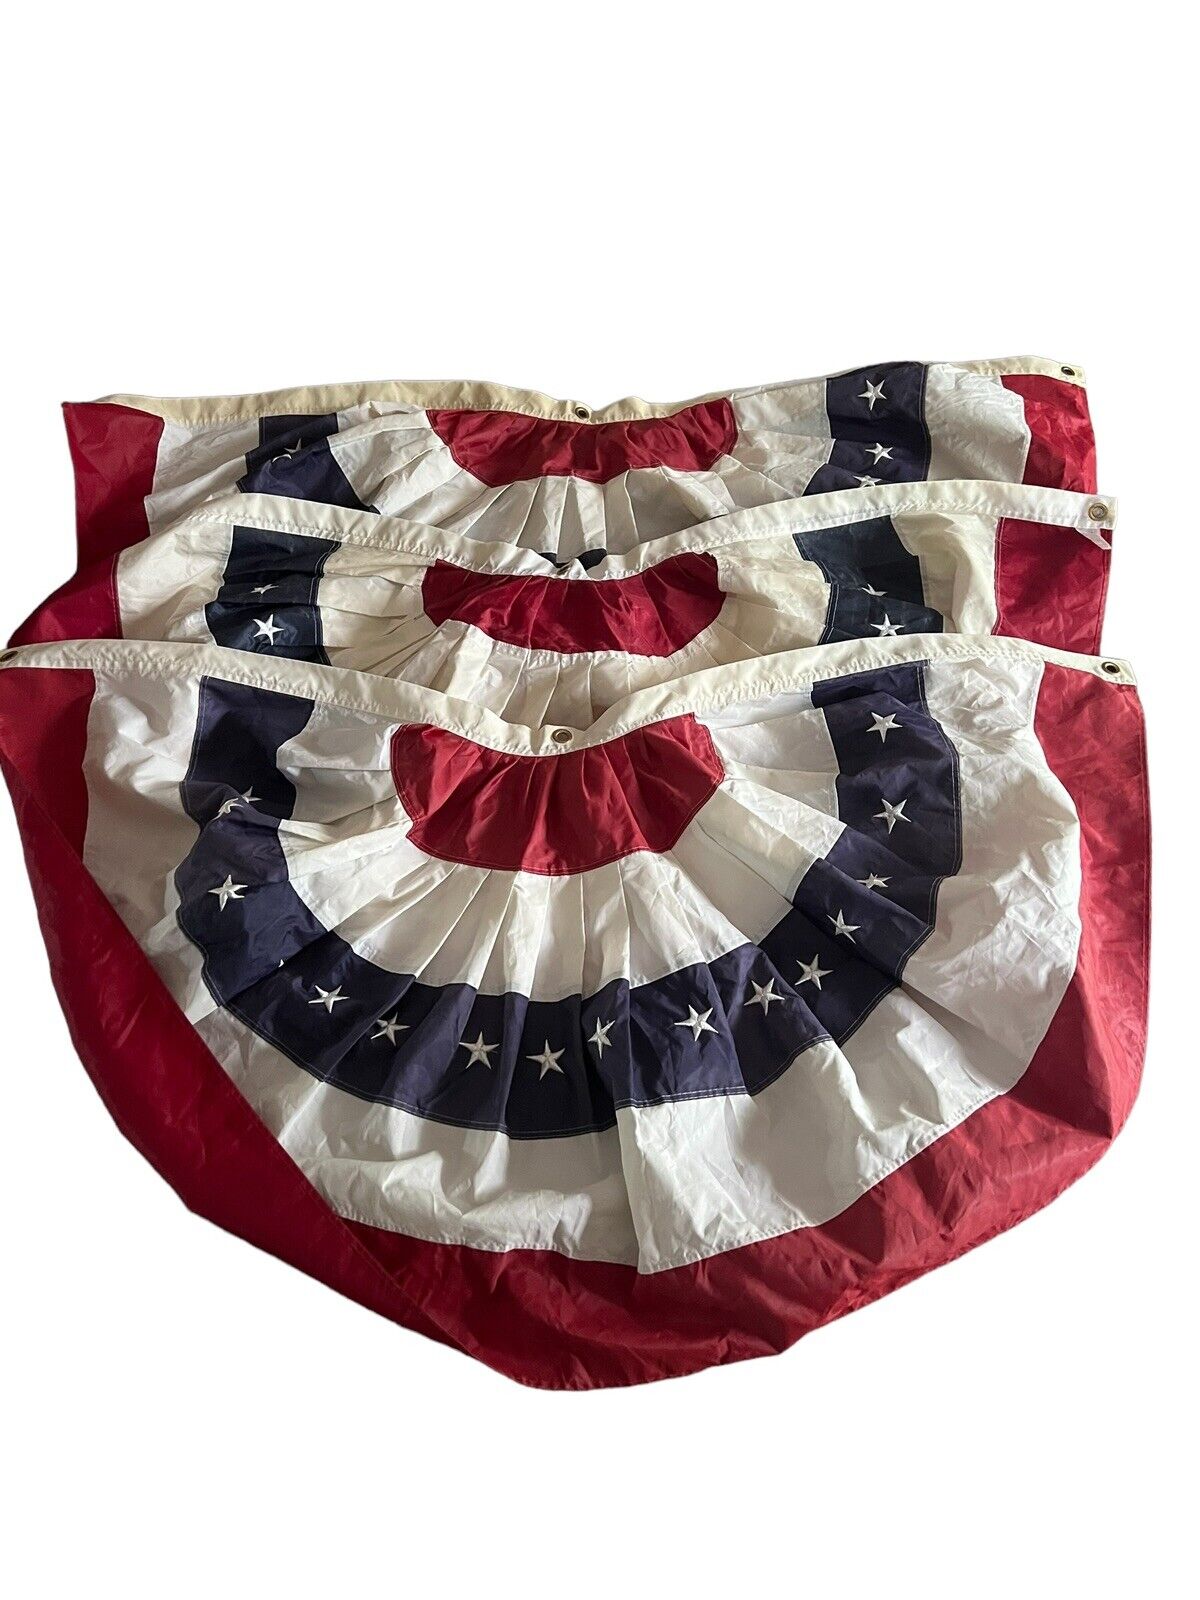 Vintage American Flag Buntings Large Set Of 3 Pleated 4th Of July Decorations